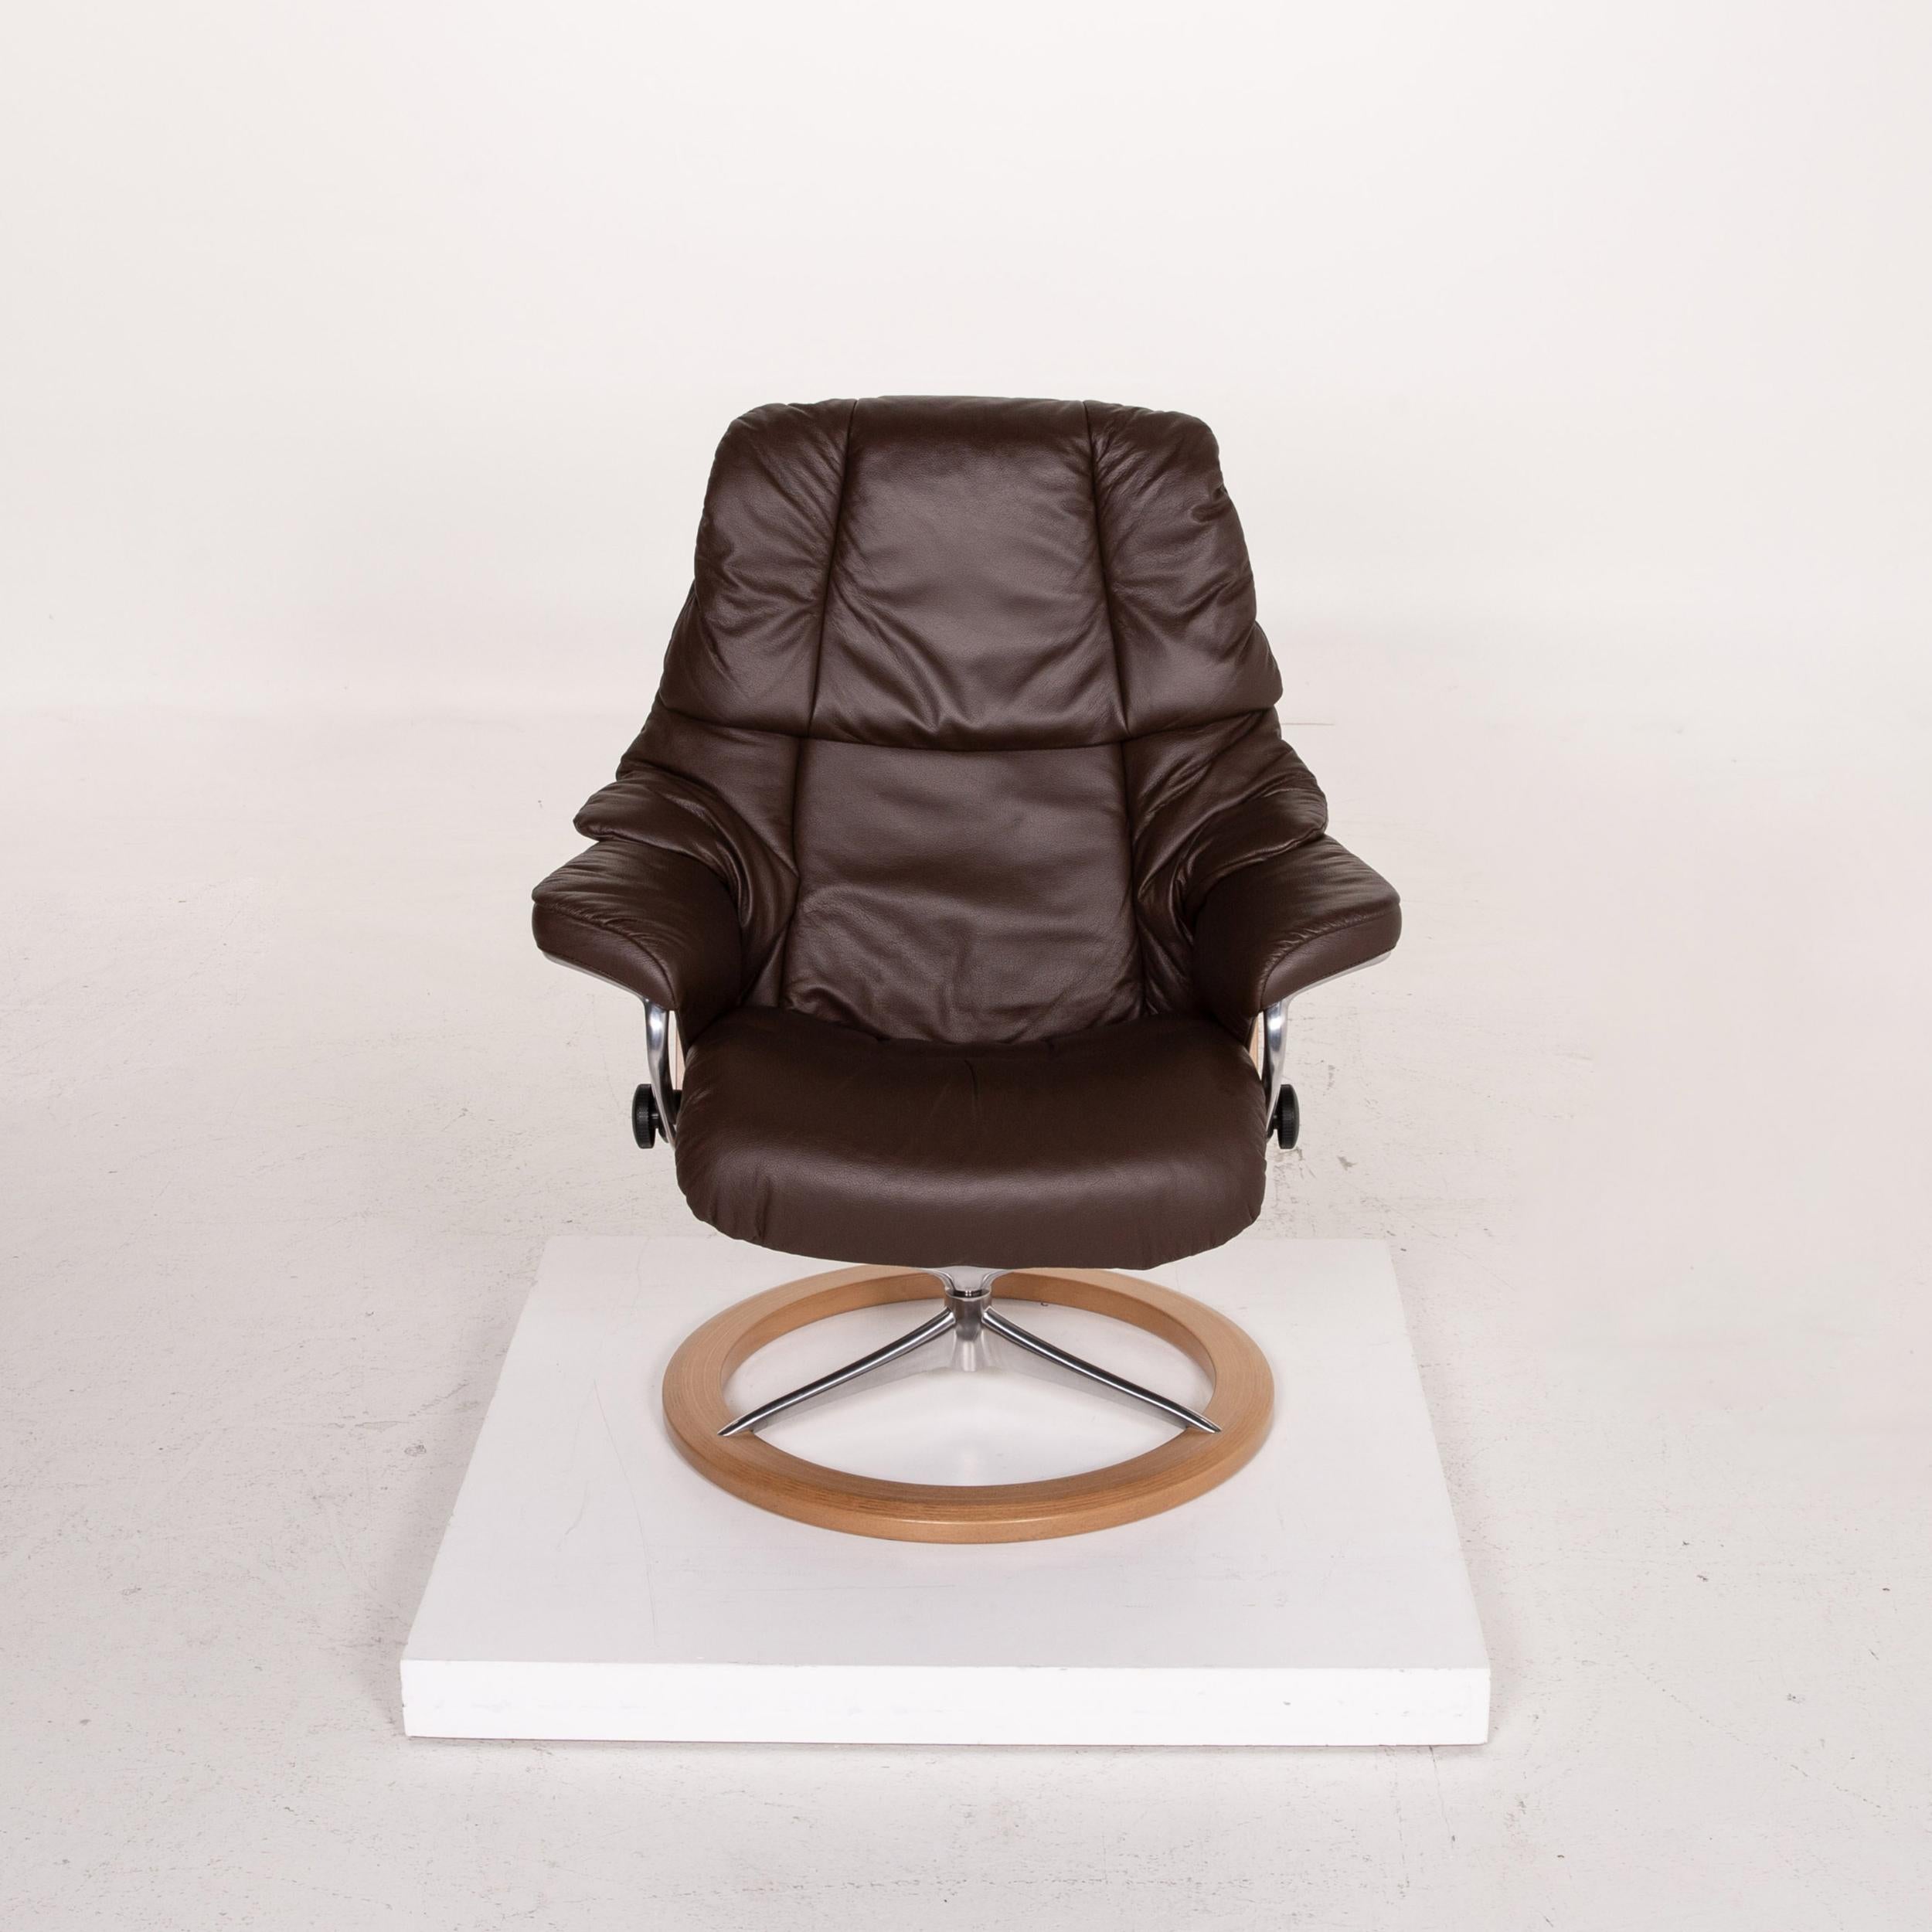 Stressless Reno Leather Armchair Incl. Stool Dark Brown Brown Relaxation 5